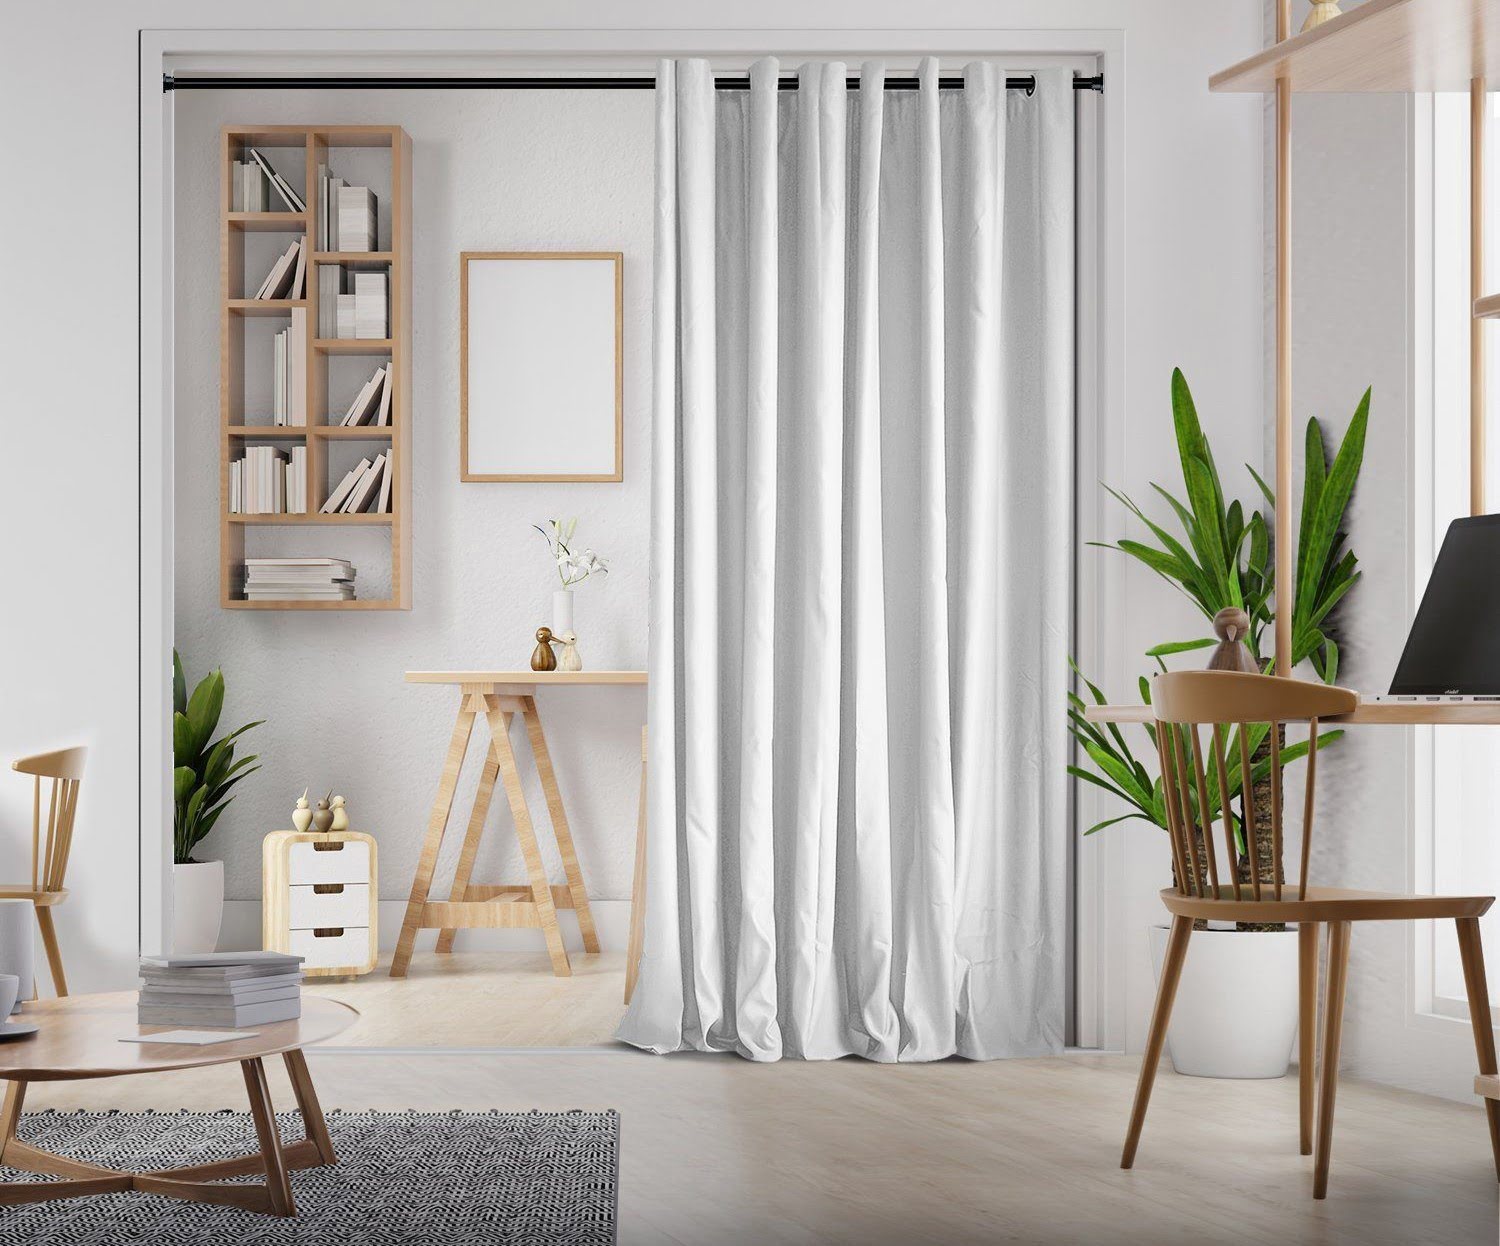 How To Hang Curtains As A Room Divider